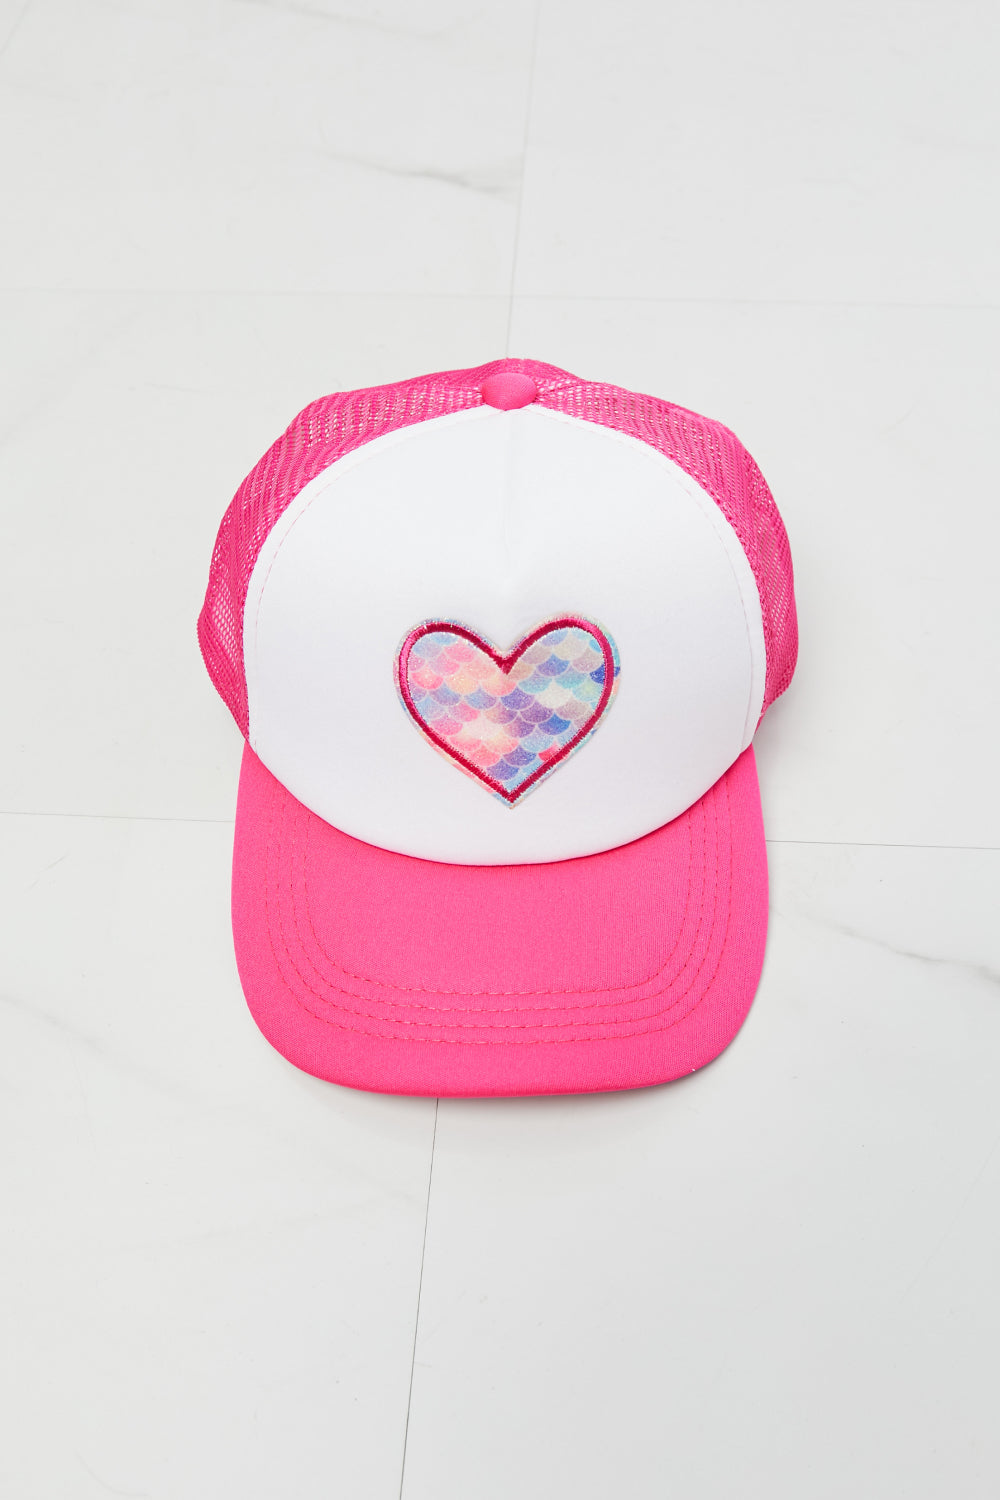 Fame Falling For You Trucker Hat in Pink - Tigbuls Variety Fashion